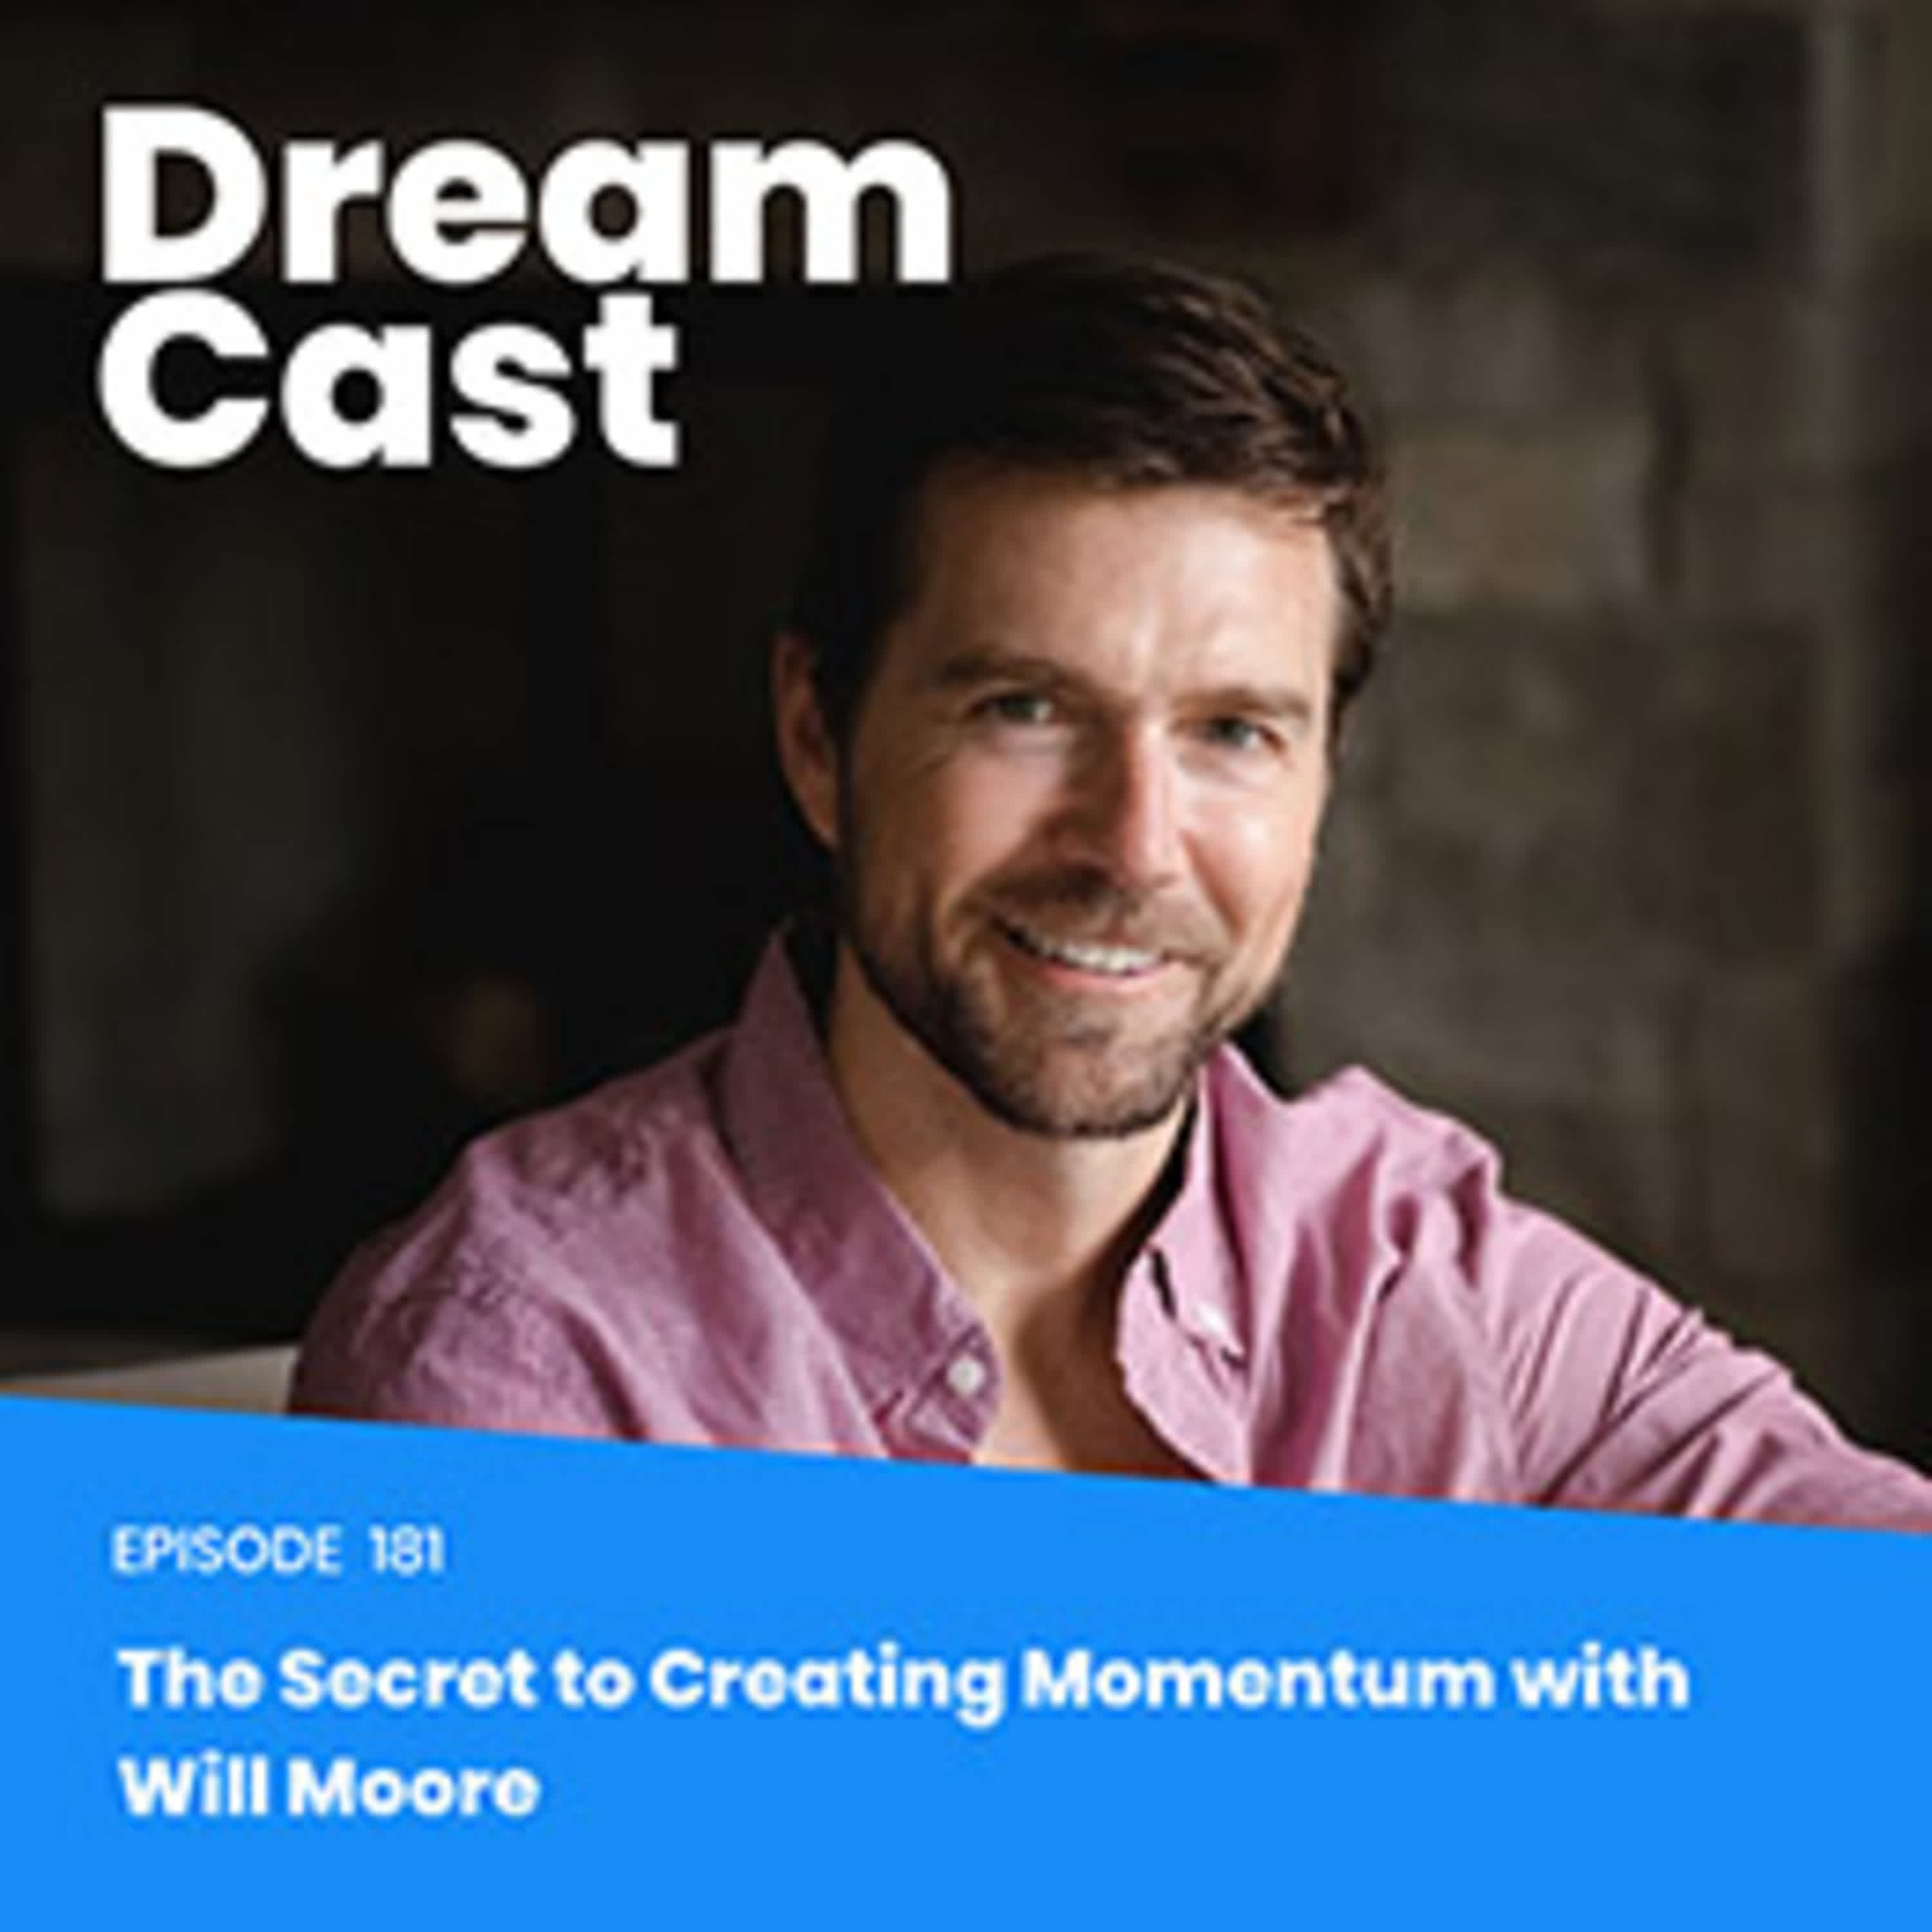 The Secret to Creating Momentum with Will Moore